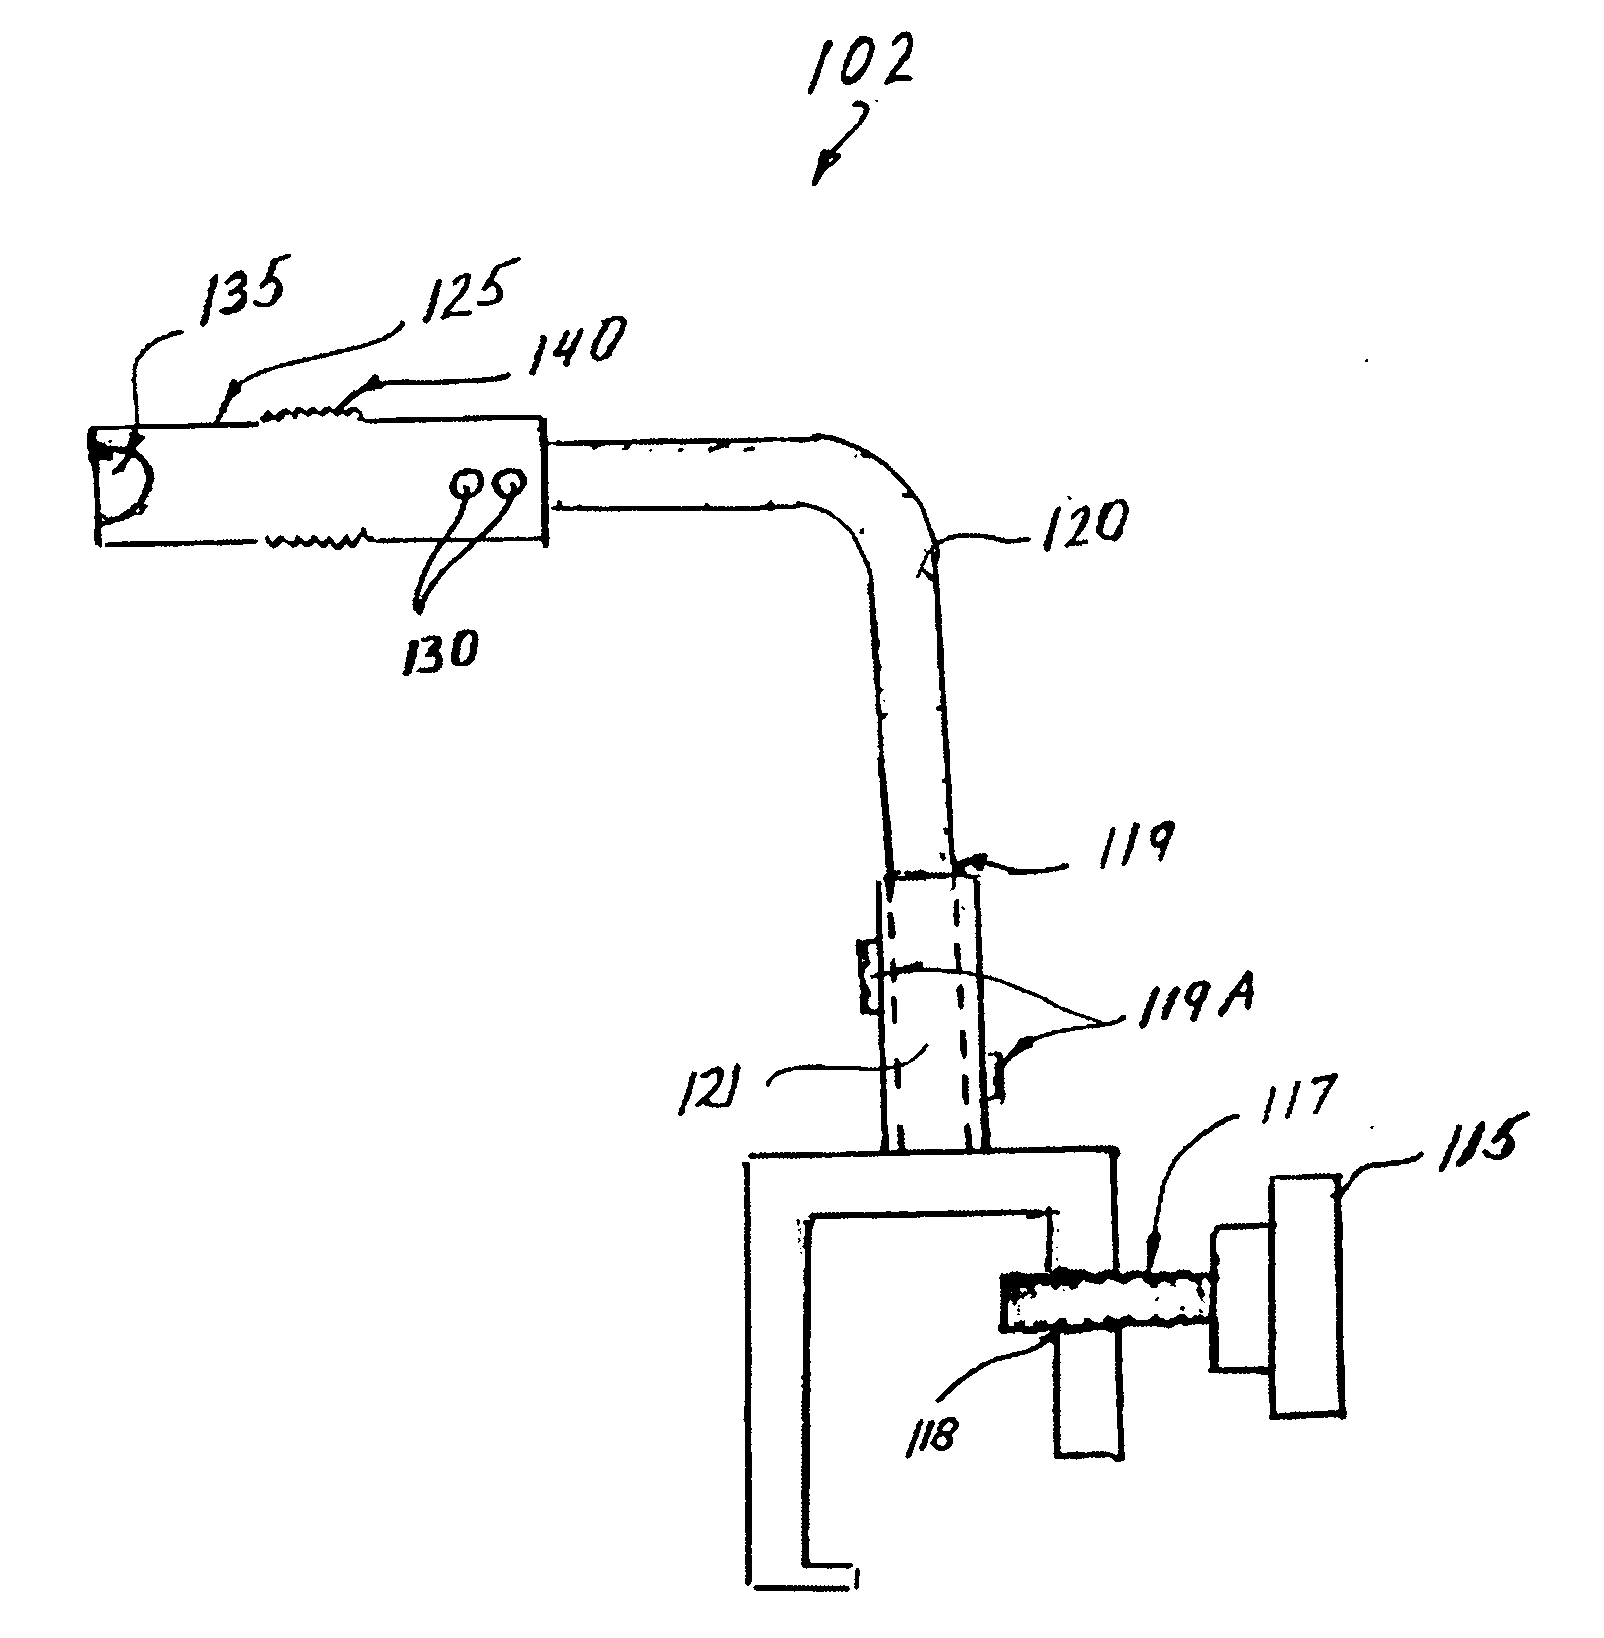 Device for holding a medical instrument